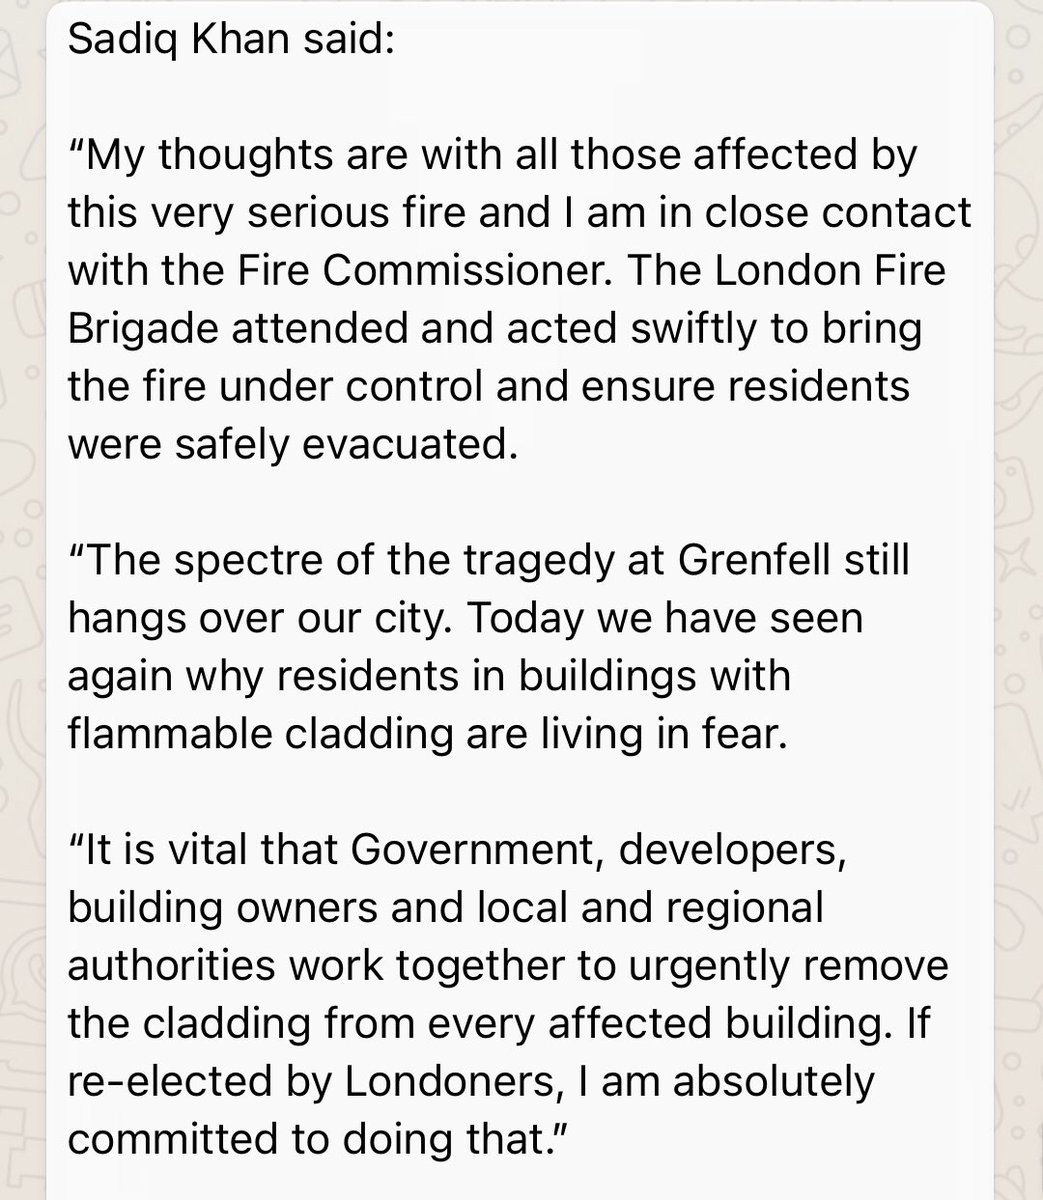 And a statement from  @SadiqKhan - who says the “spectre of the tragedy at Grenfell still hangs over our city.”